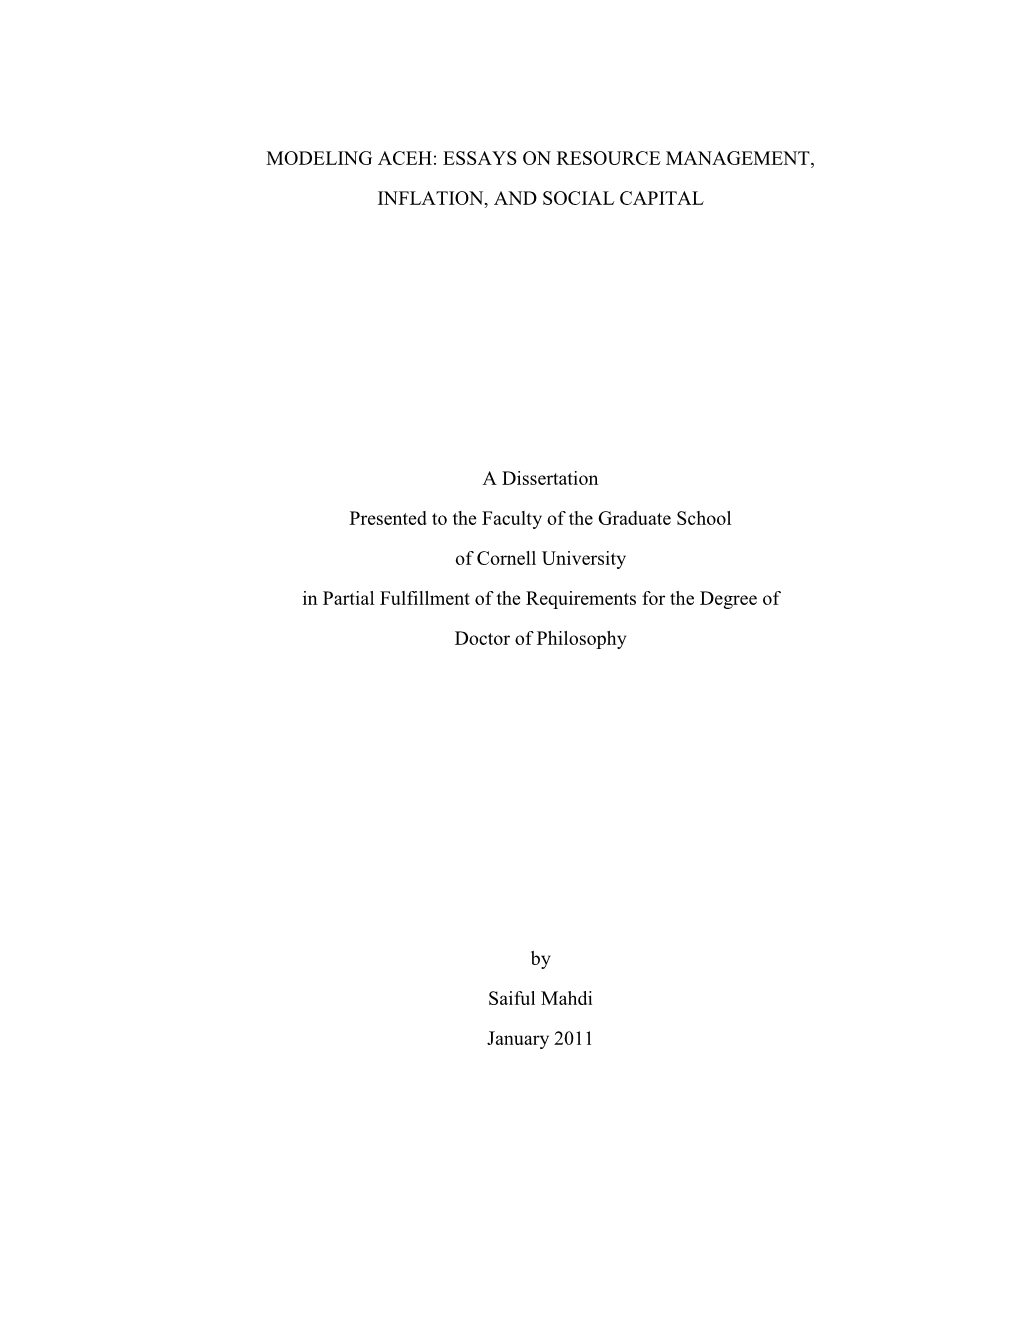 Modeling Aceh: Essays on Resource Management, Inflation, and Social Capital